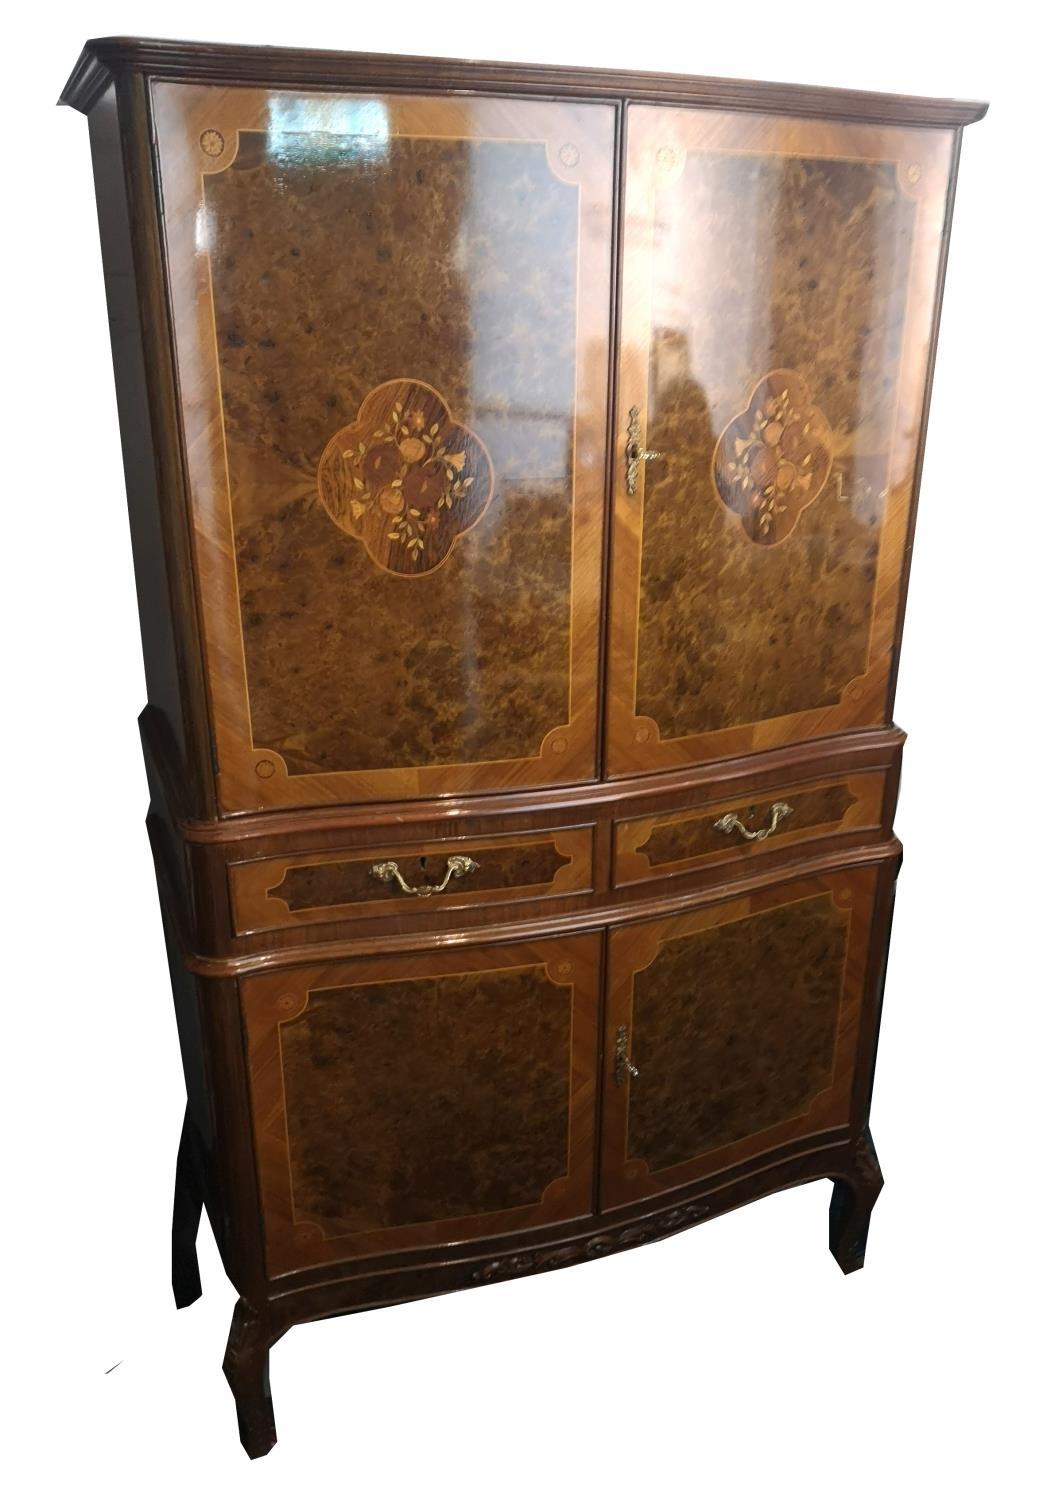 AN ITALIAN WALNUT AND FLORAL INLAID DRINK’S CABINET With two four doors and central drawers. (86cm x - Image 2 of 2